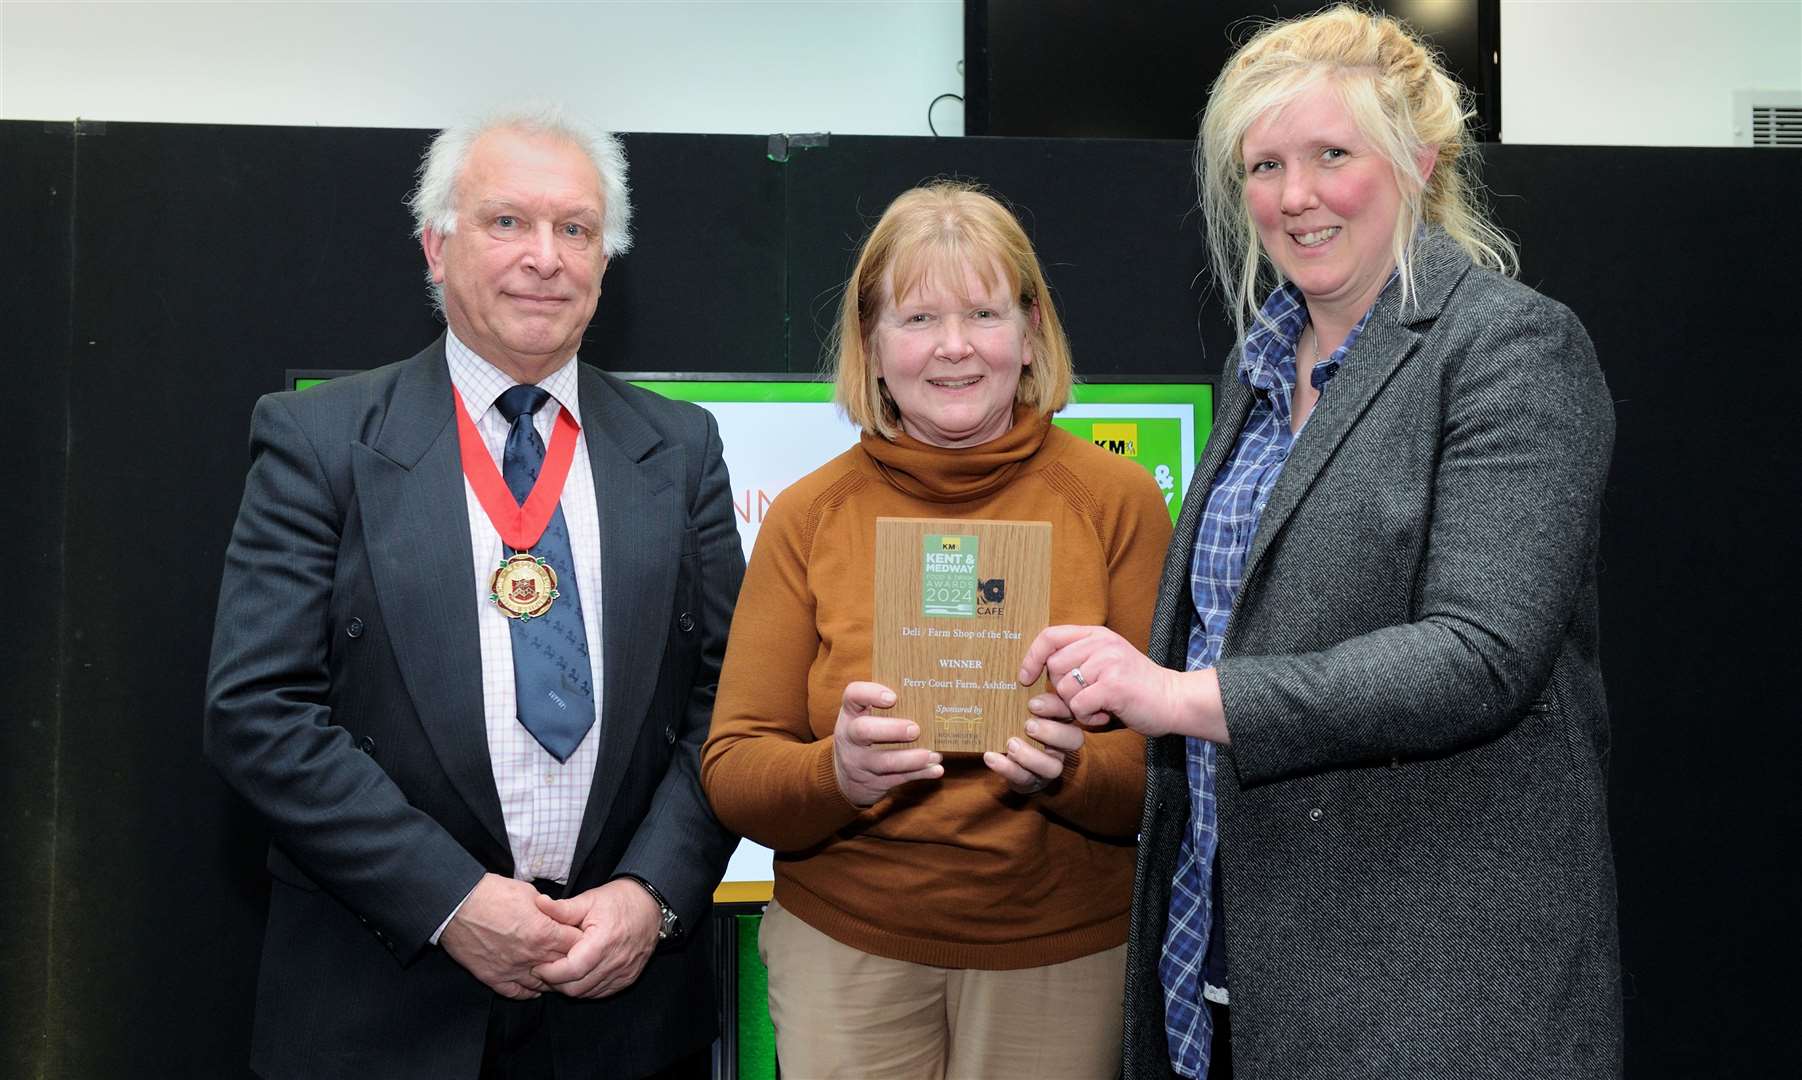 Heidi and Jessica Fermer accepted the award for Deli / Farm Shop of the Year. Perry Court Farm has been owned by the Fermor family since the 1950s and, today, it grows and sells apples, pears, cherries, potatoes and asparagus. Picture: Simon Hildrew